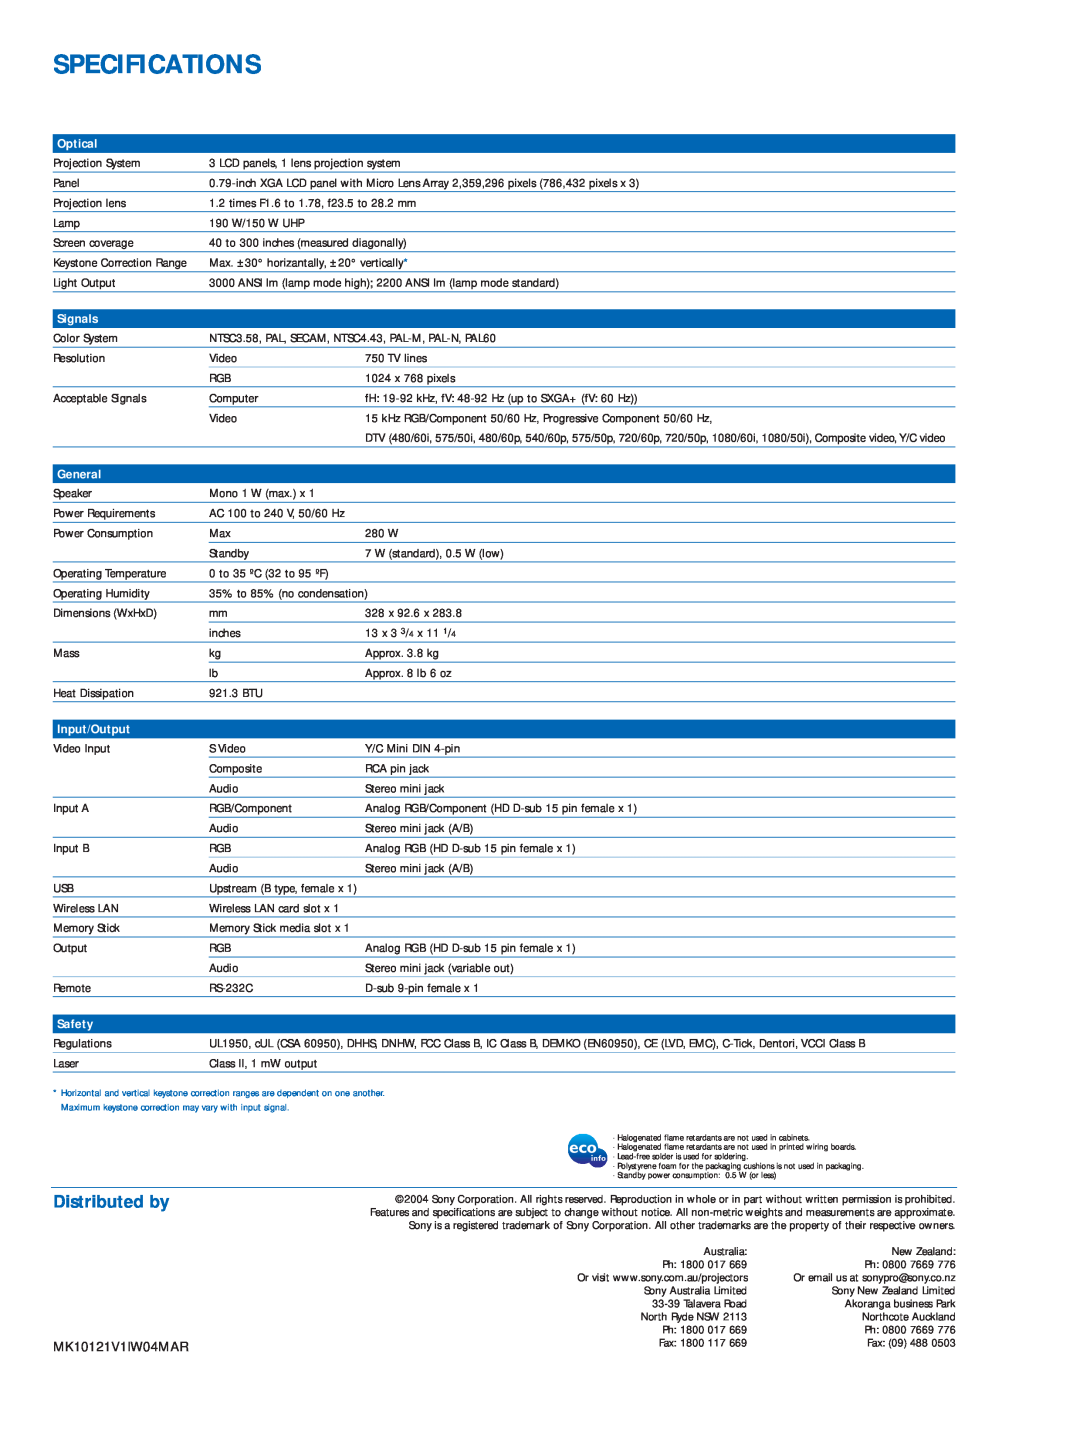 Sony VPL-CX85 manual Specifications, Distributed by, Optical, Signals, General, Input/Output, Safety 